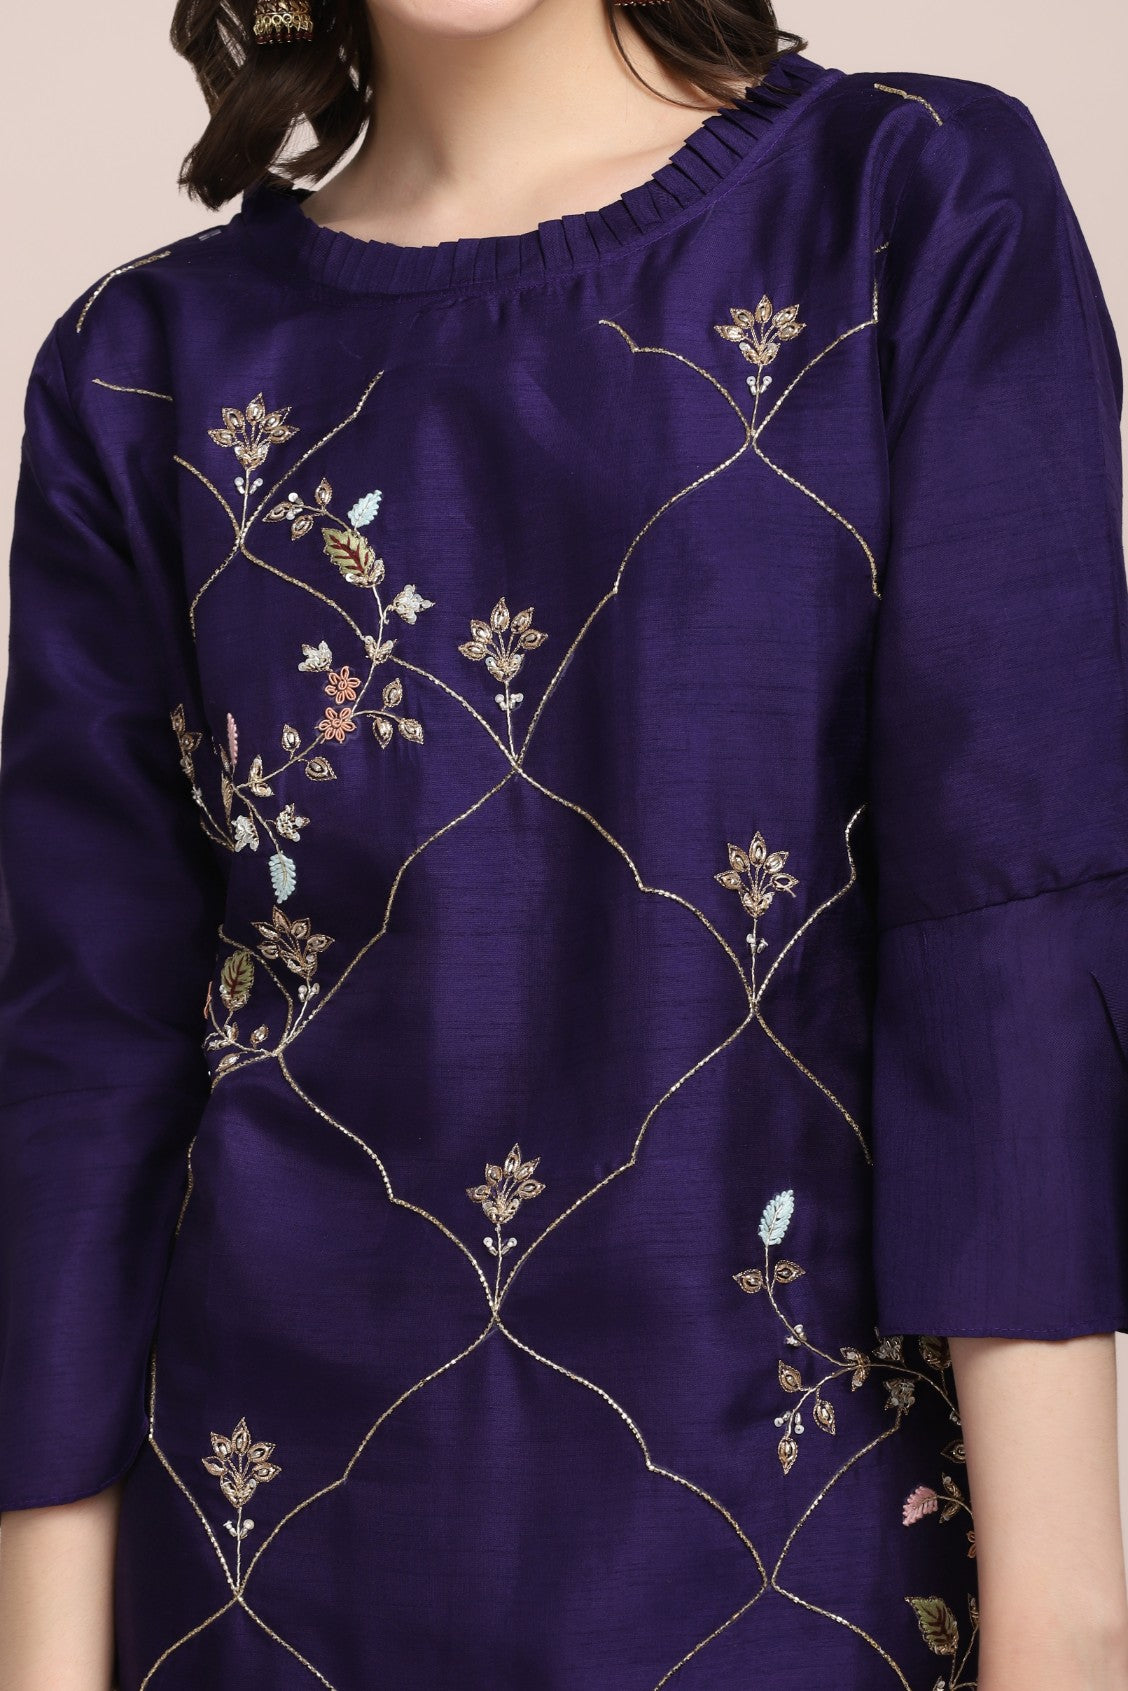 Gorgeous purple color peacock motif embroidered kurti